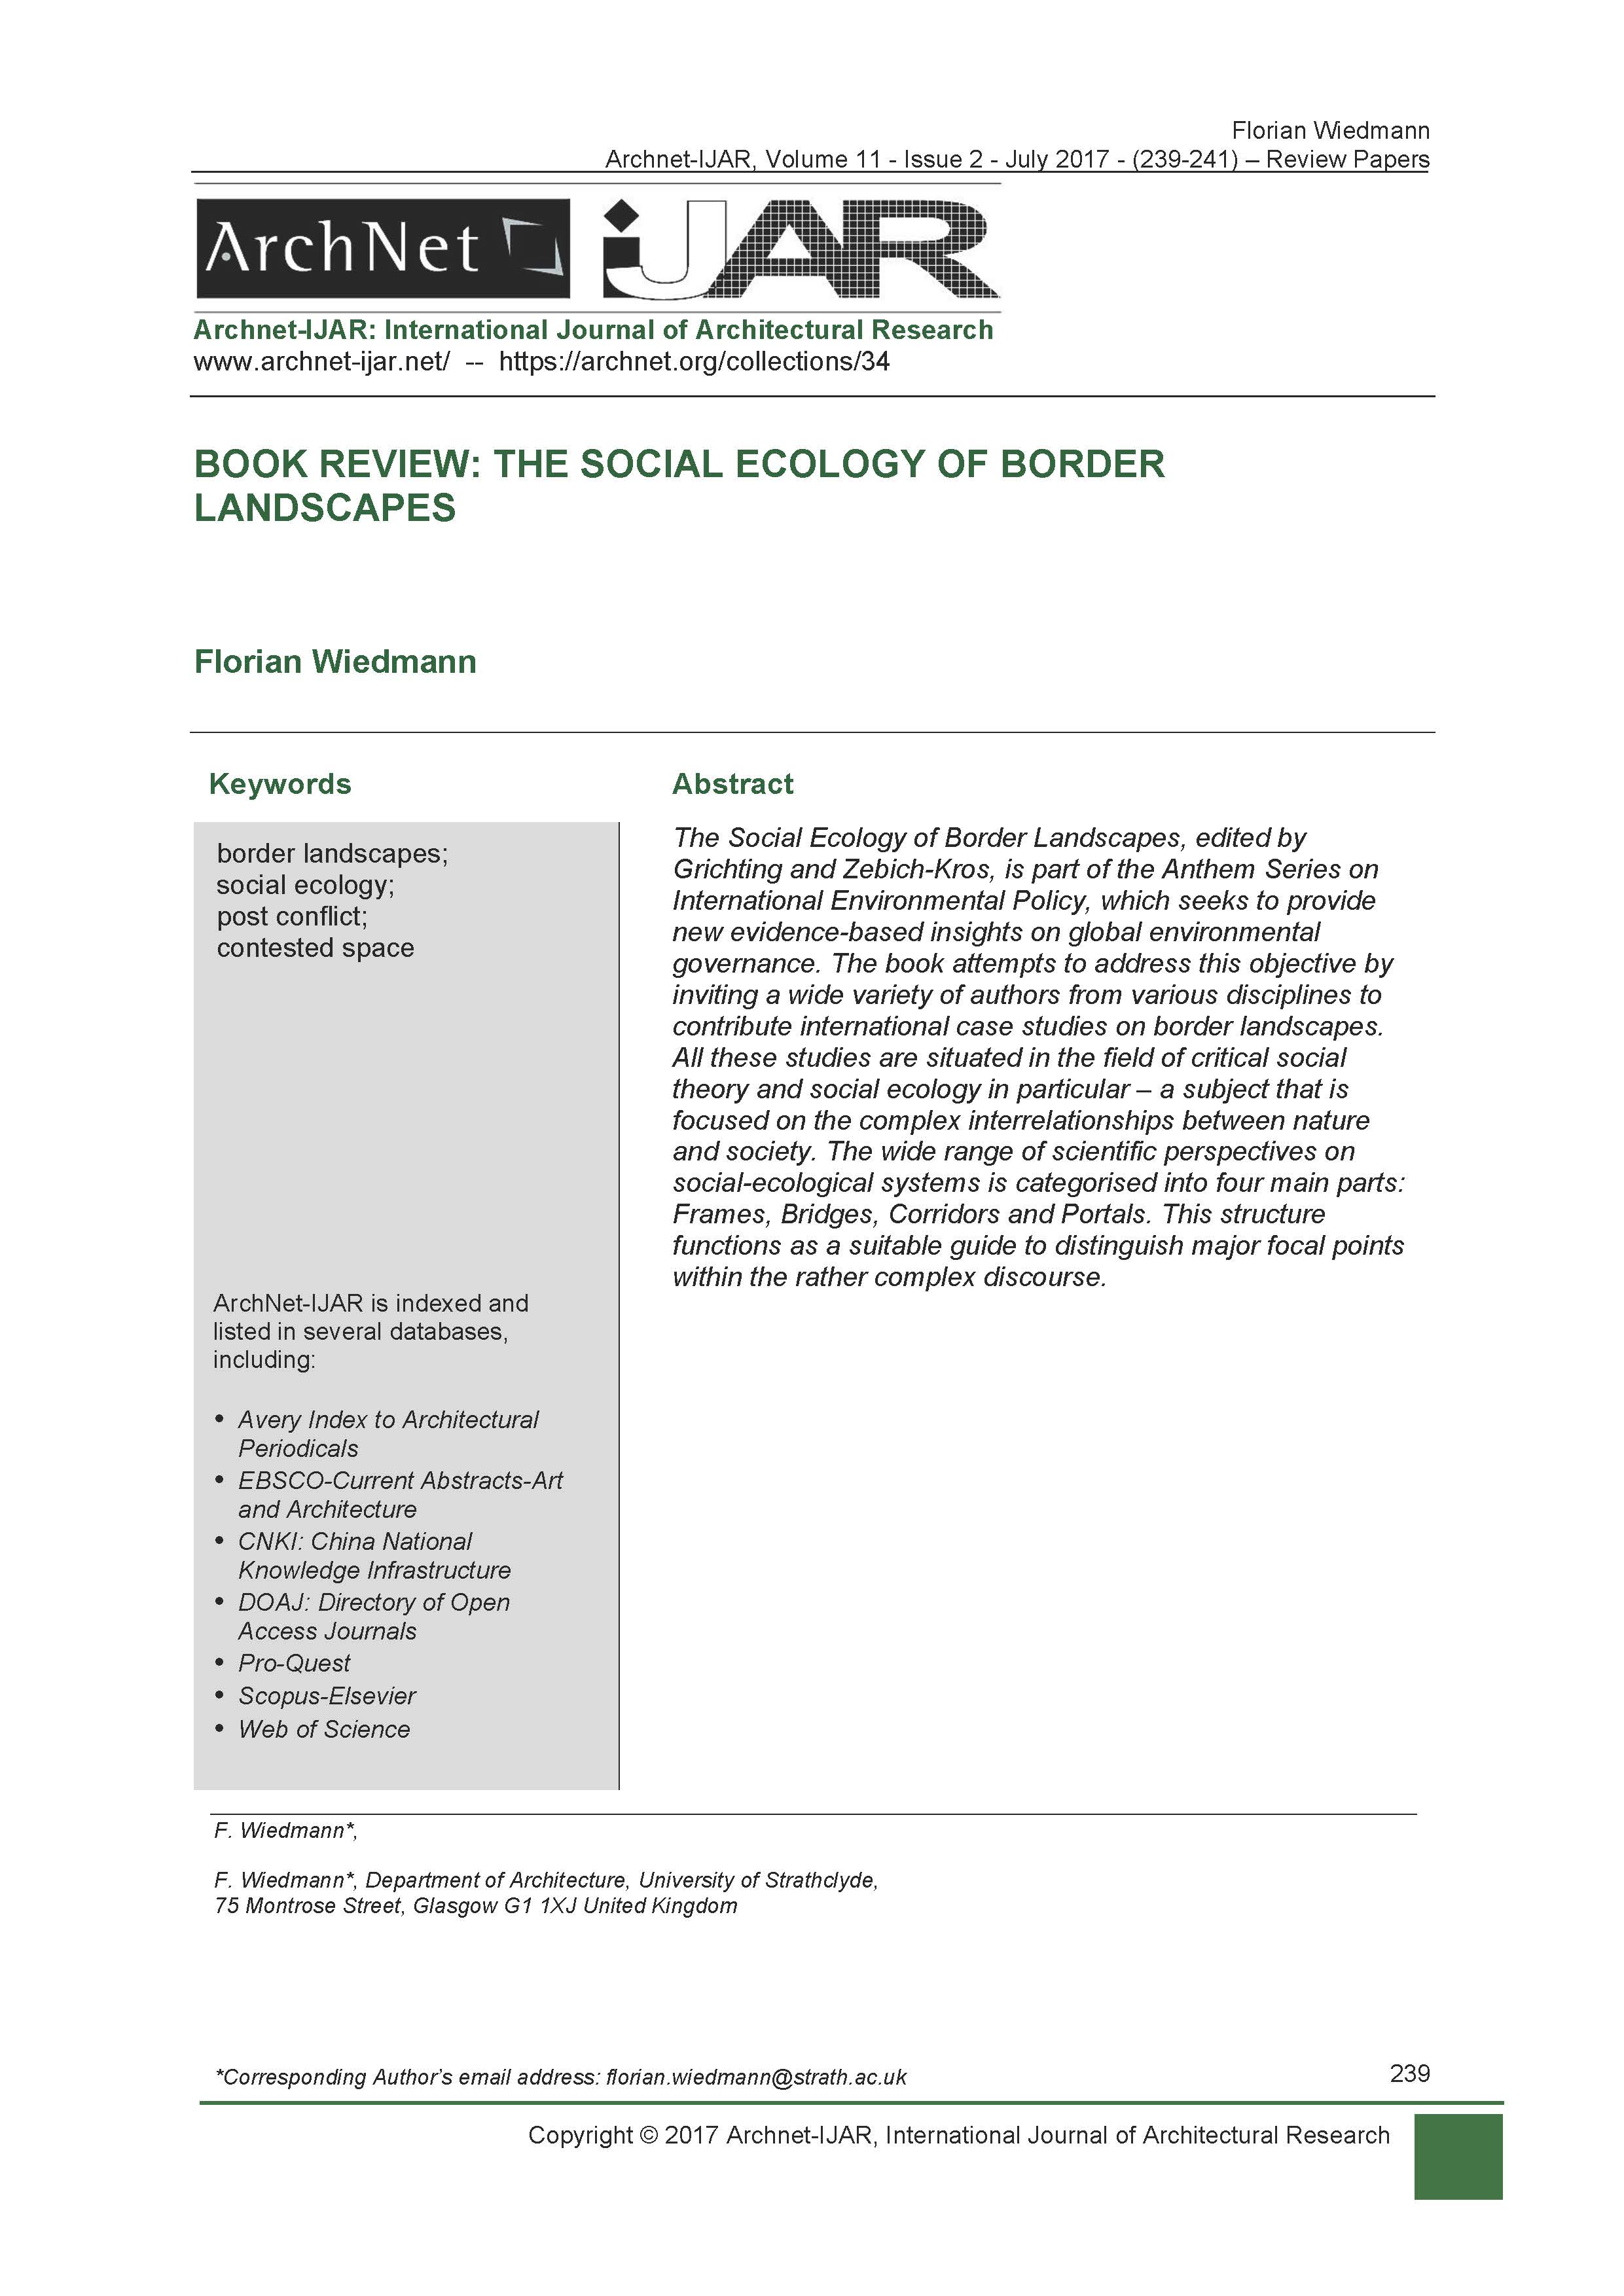 Florian Wiedmann - <div style="text-align: justify;">The Social Ecology of Border Landscapes, edited by Grichting and Zebich-Kros, is part of the Anthem Series on International Environmental Policy, which seeks to provide new evidence-based insights on global environmental governance. The book attempts to address this objective by inviting a wide variety of authors from various disciplines to contribute international case studies on border landscapes. All these studies are situated in the field of critical social theory and social ecology in particular – a subject that is focused on the complex interrelationships between nature and society. The wide range of scientific perspectives on social-ecological systems is categorised into four main parts: Frames, Bridges, Corridors and Portals. This structure functions as a suitable guide to distinguish major focal points within the rather complex discourse.</div><div style="text-align: justify;"><br></div><div style="text-align: justify;"><span style="font-weight: bold;">Keywords:</span></div><div style="text-align: justify;"><span style="font-weight: bold;"><br></span></div><div style=""><span style="text-align: left;">border landscapes; social ecology; post conflict; contested space</span><span style="font-weight: bold;"><br></span></div>